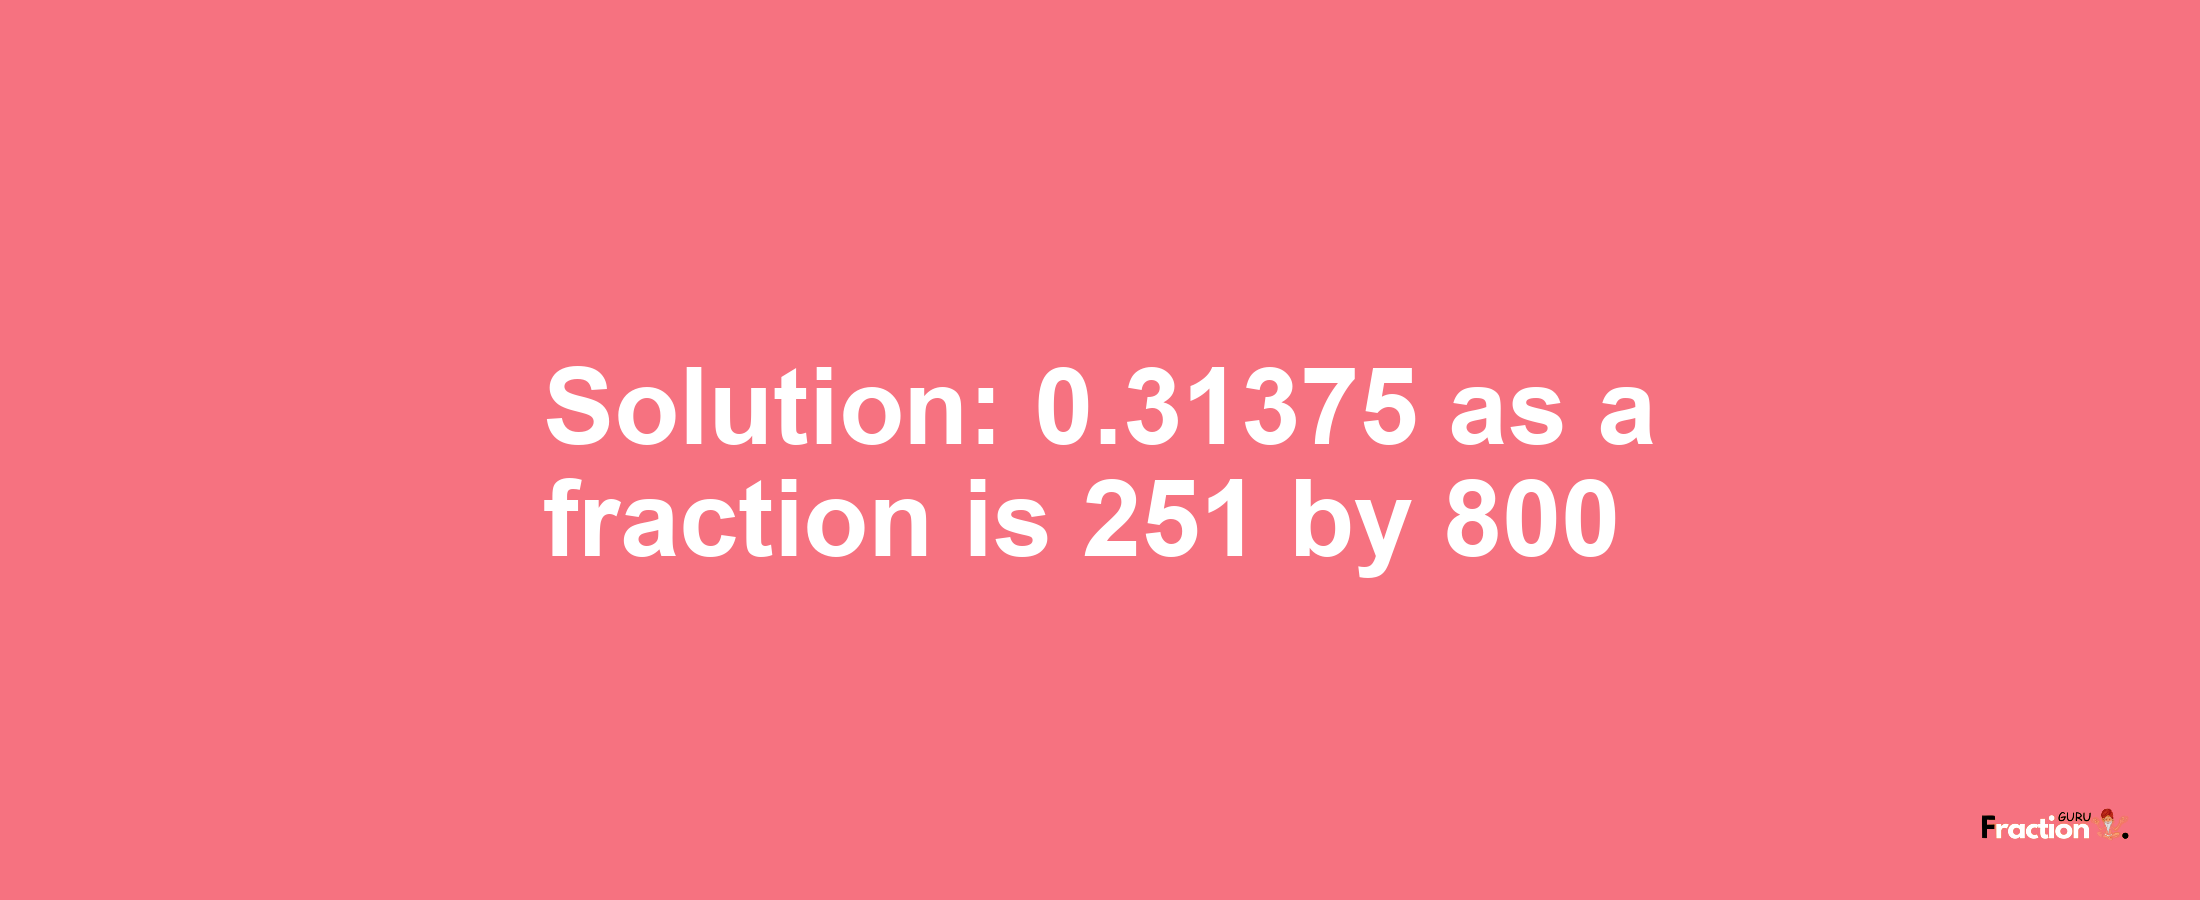 Solution:0.31375 as a fraction is 251/800